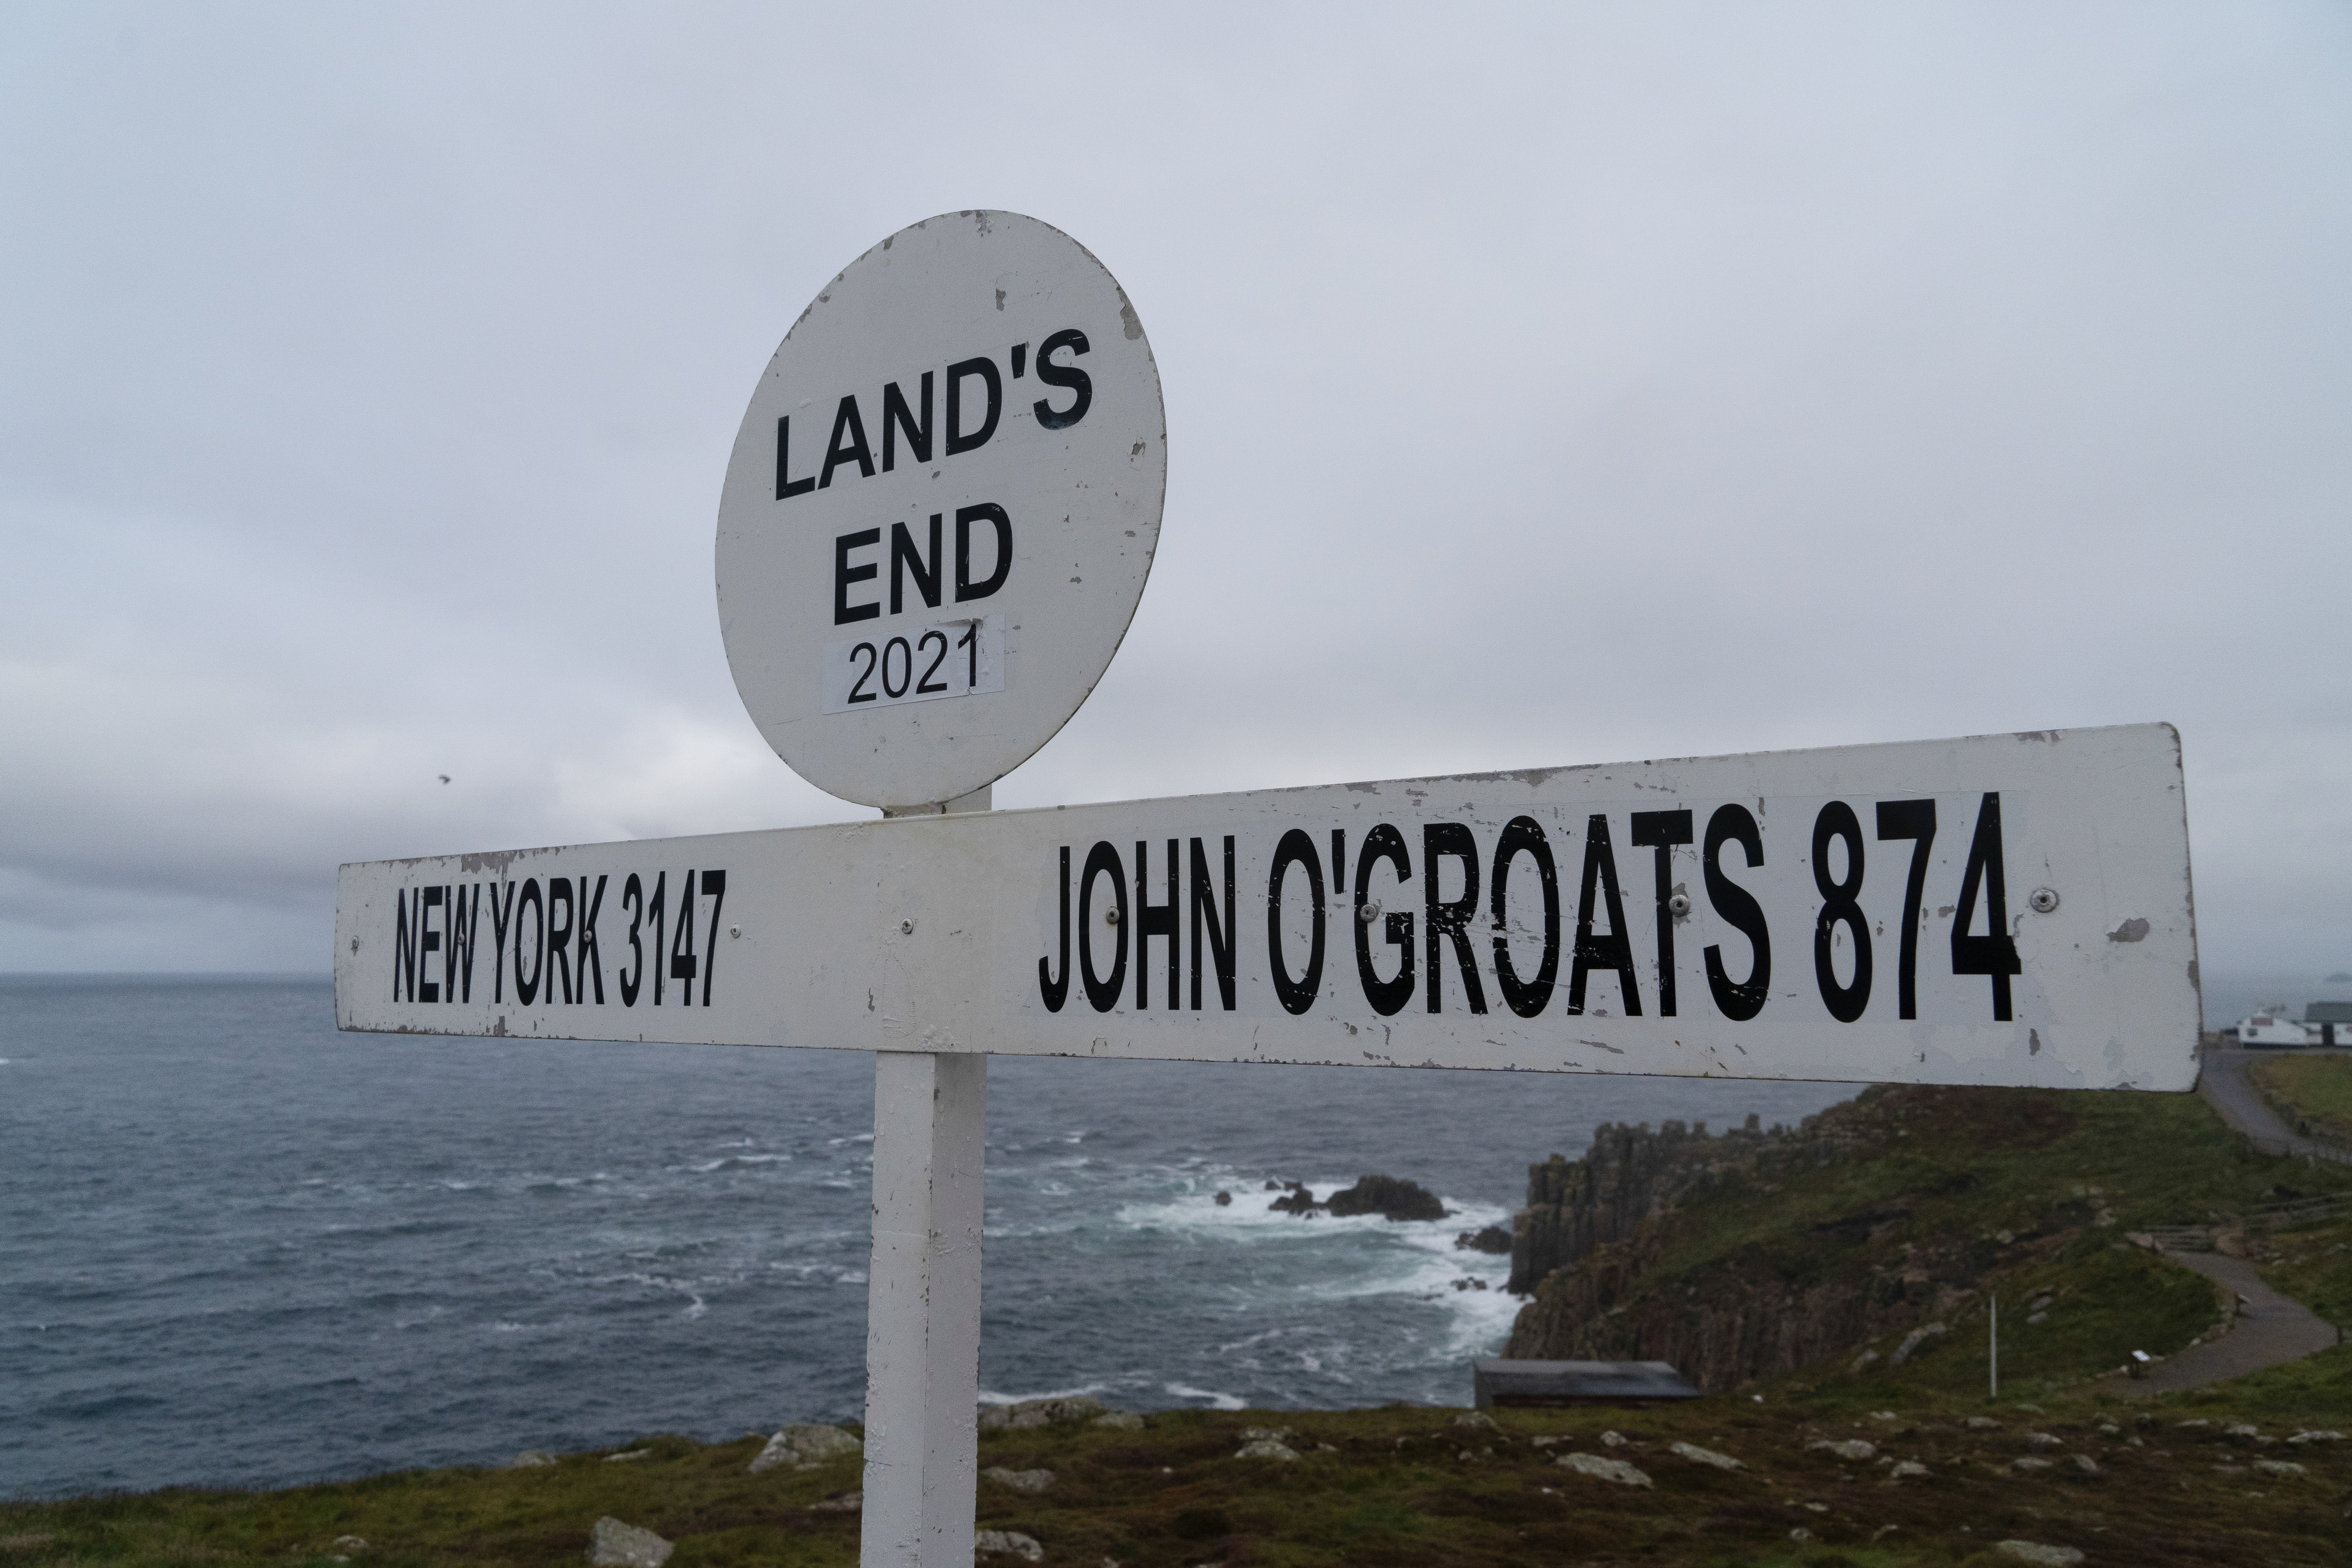 The Land’s End to John o’Groats sign is one of the most famous signs in the UK. It is a marker for the most south-westerly tip of the United Kingdom. Each year athletes and adventures make the journey from Land’s End to John o’Groats, often by cycling, walking, running or driving.